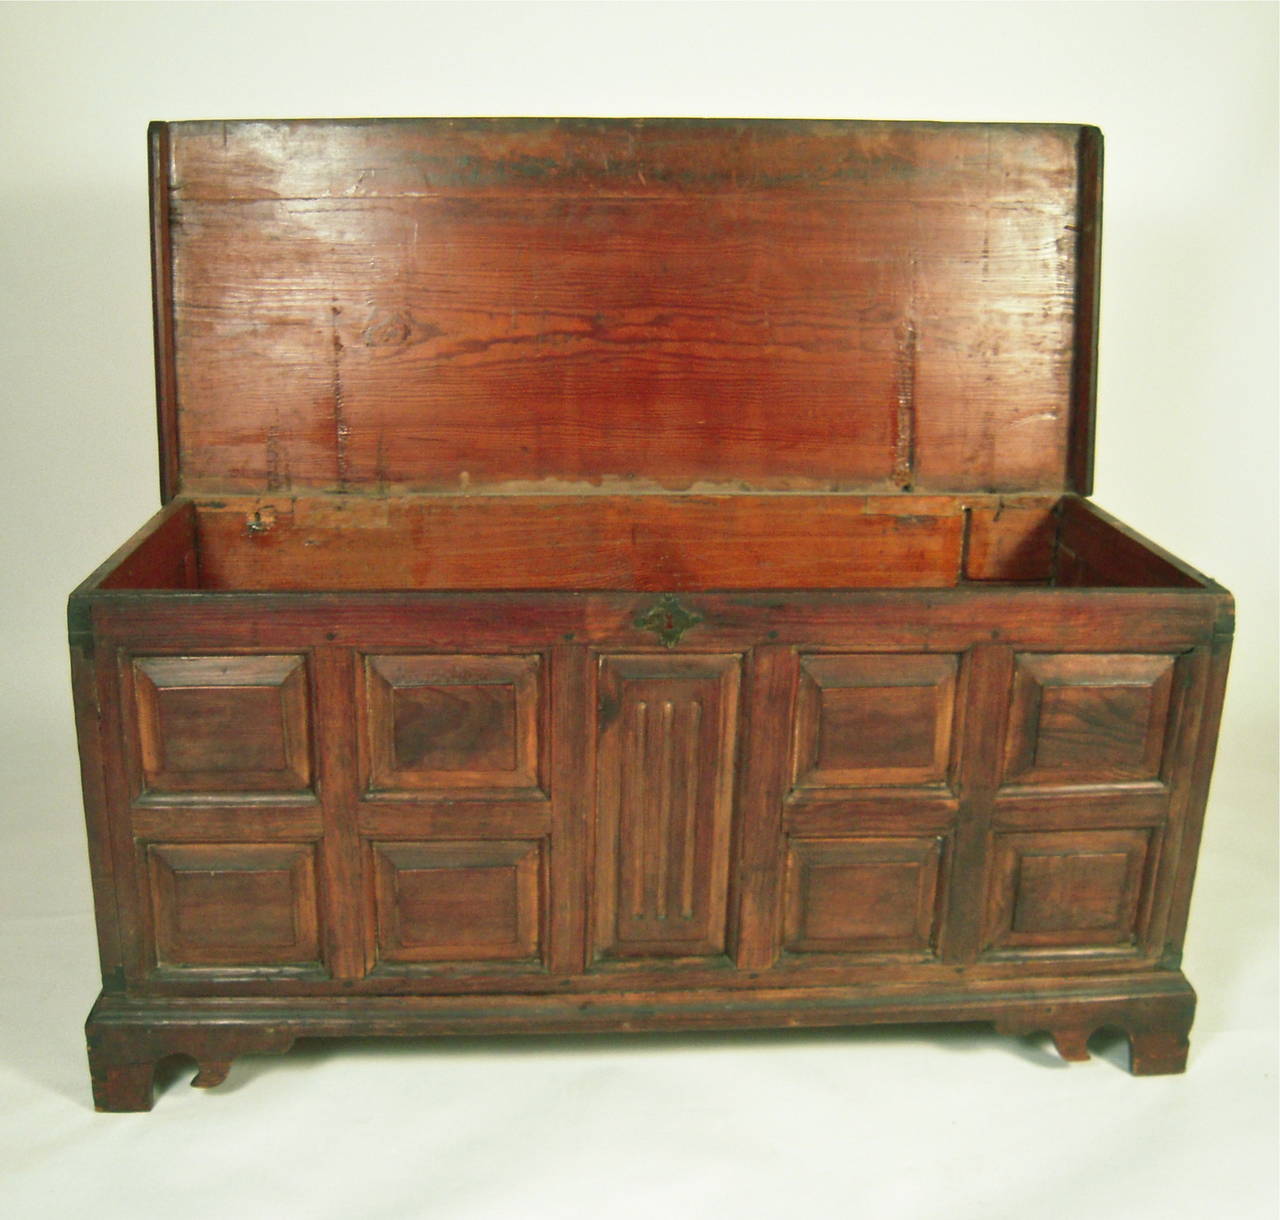 American Colonial Architectural American Southern Carved Blanket Chest, circa 1780